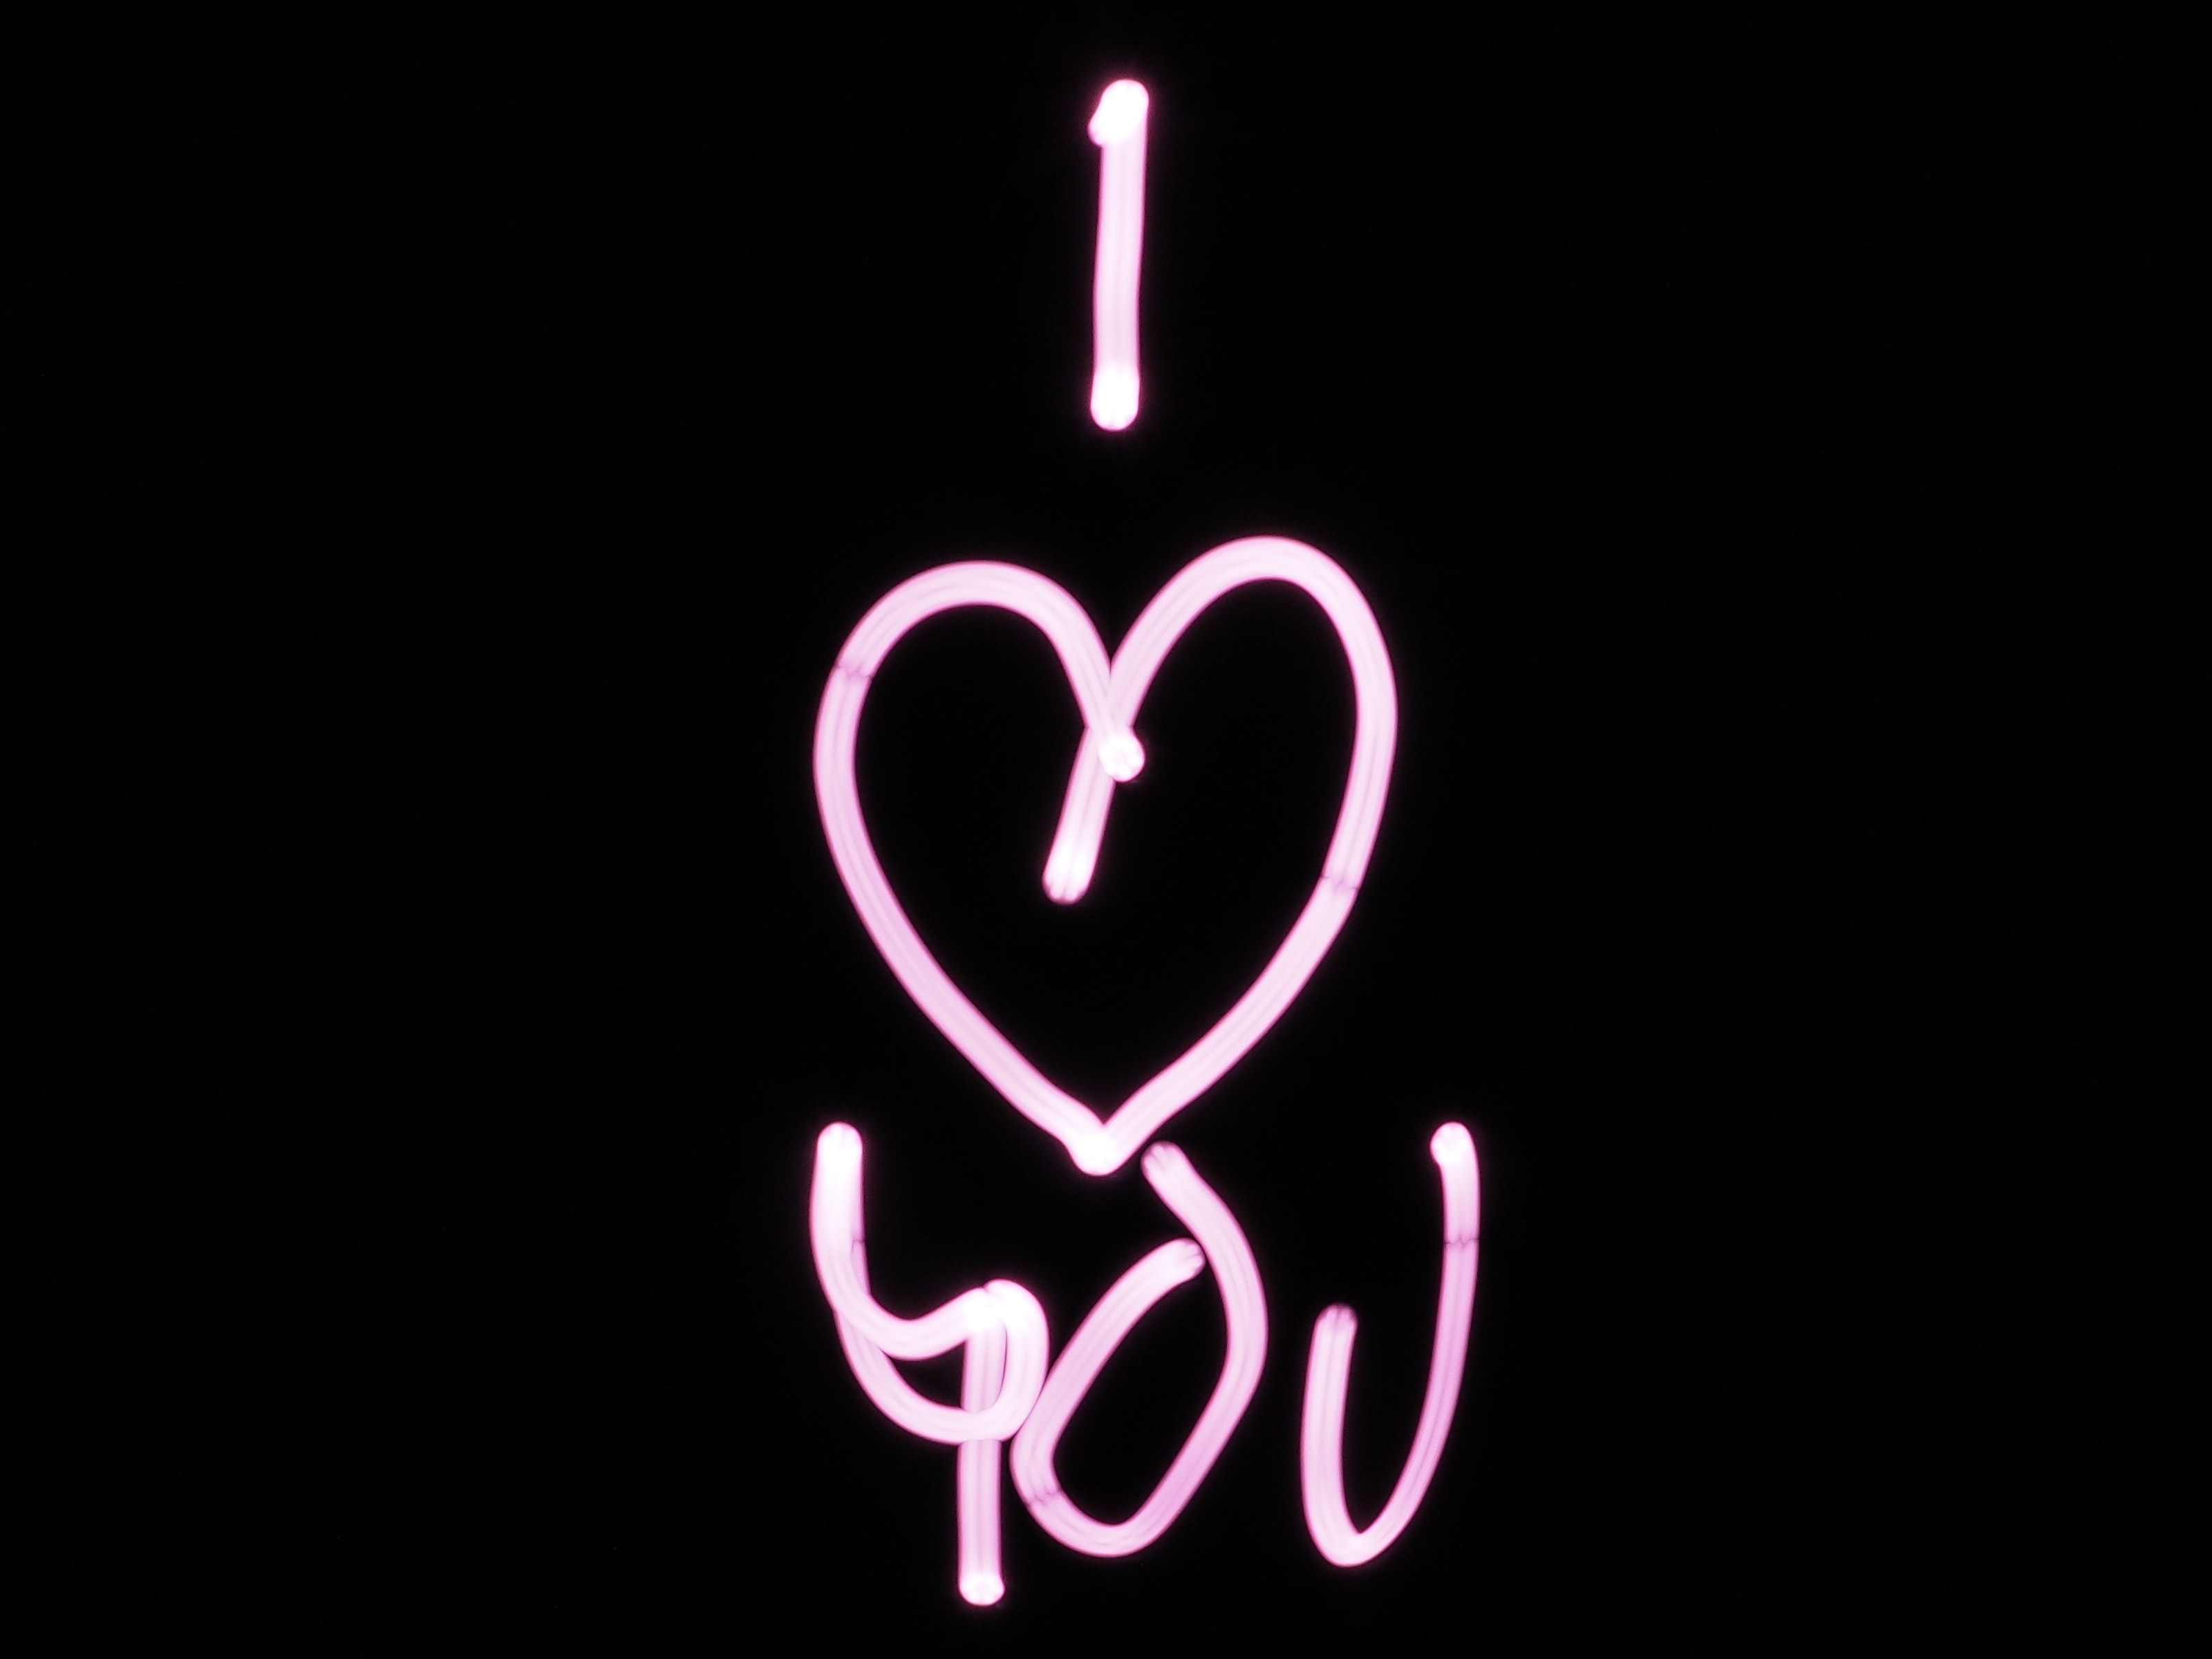 Black and Pink I Heart You Text, Light, Writing, Typography, Symbol, HQ Photo